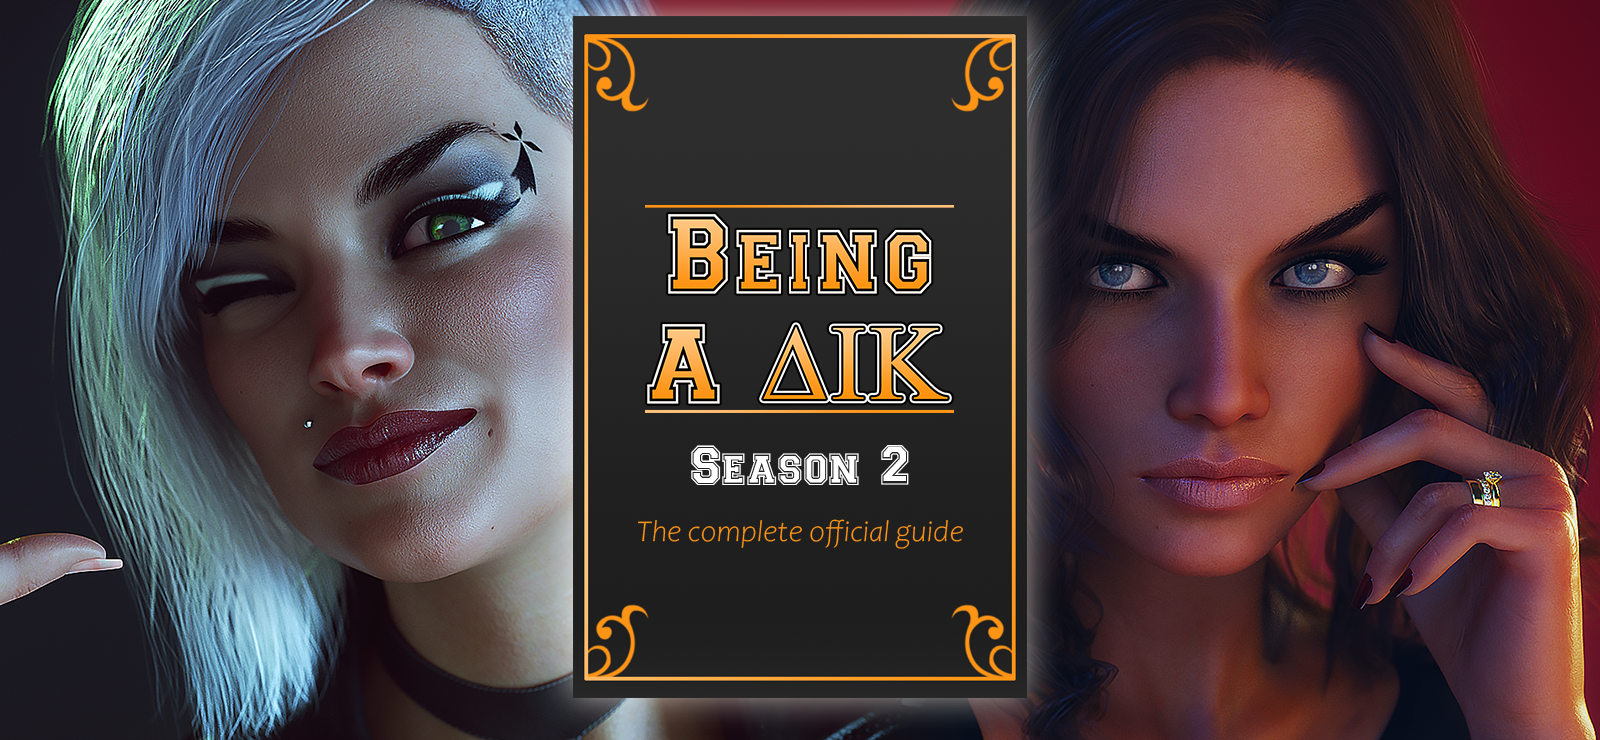 Being A DIK: Season 2 - The Complete Official Guide